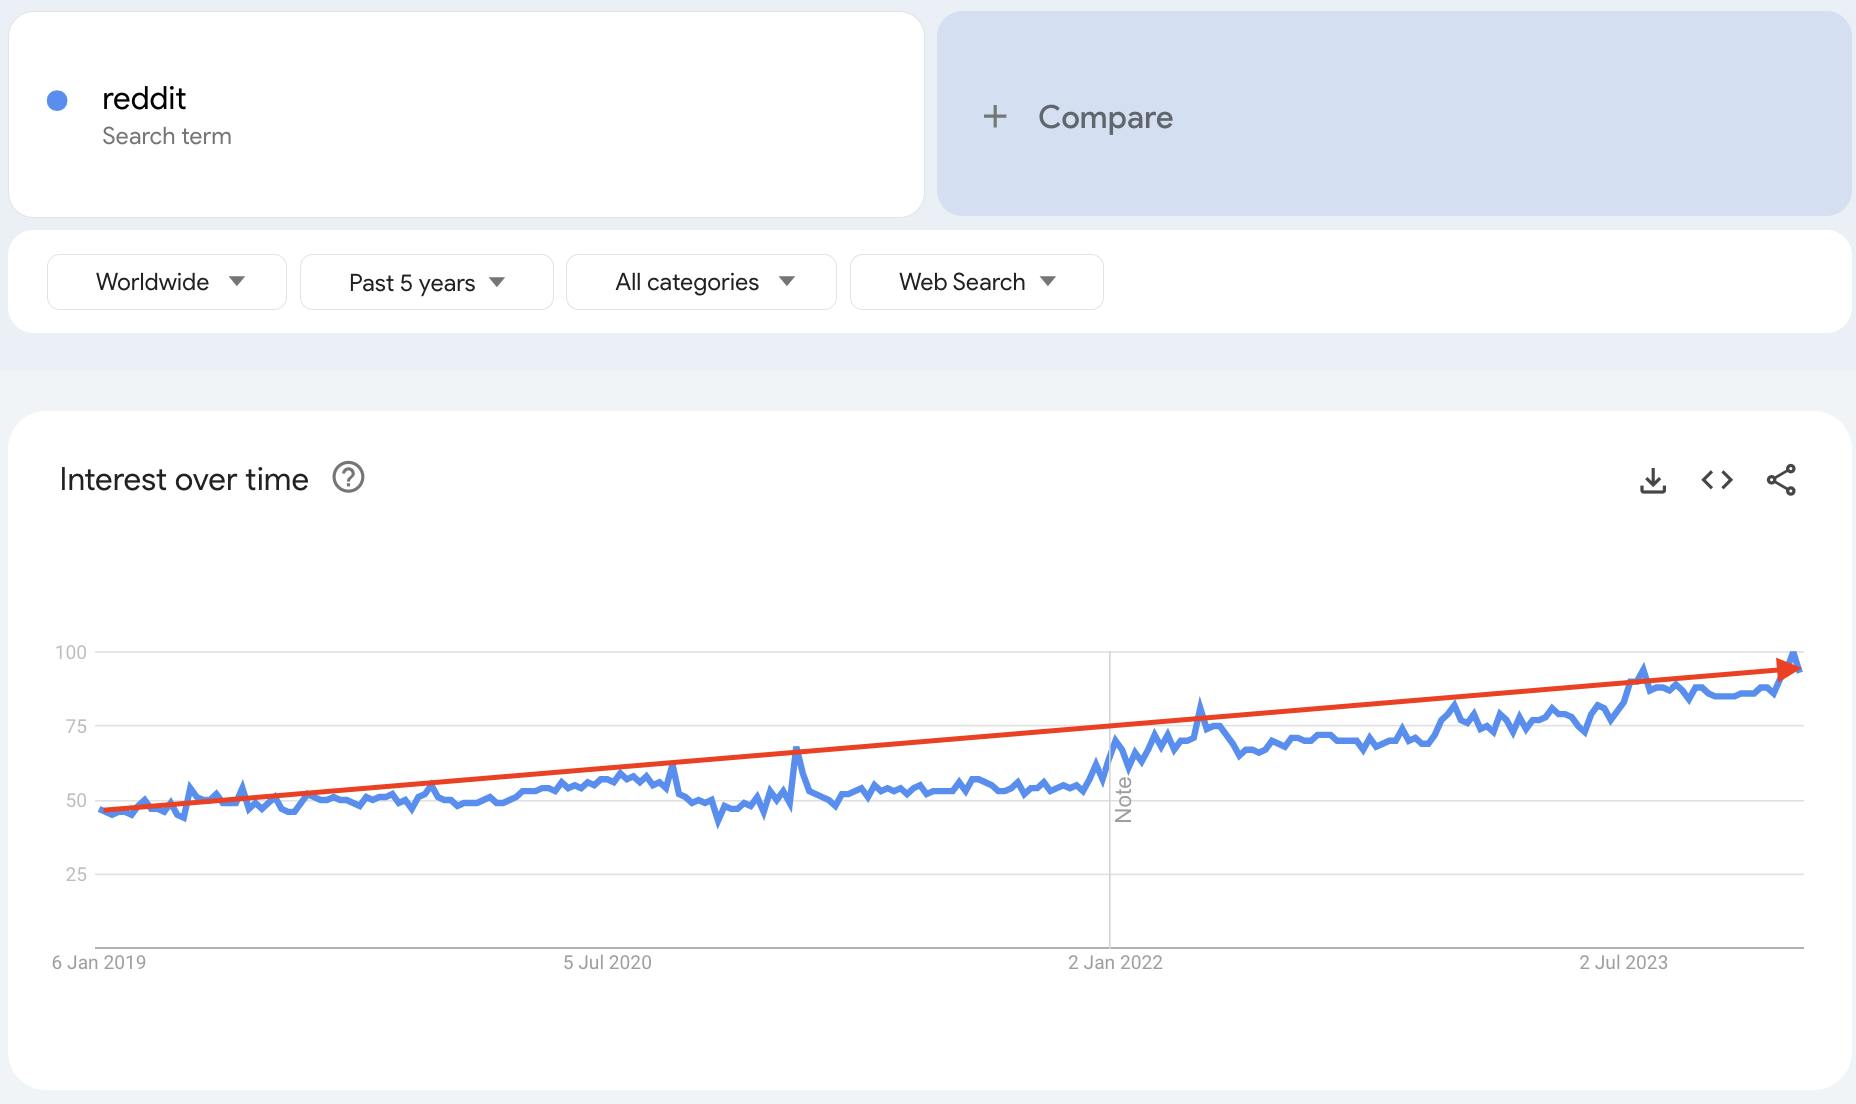 An image showing Google Trends data showing searches for reddit increasing over the past 5 years.